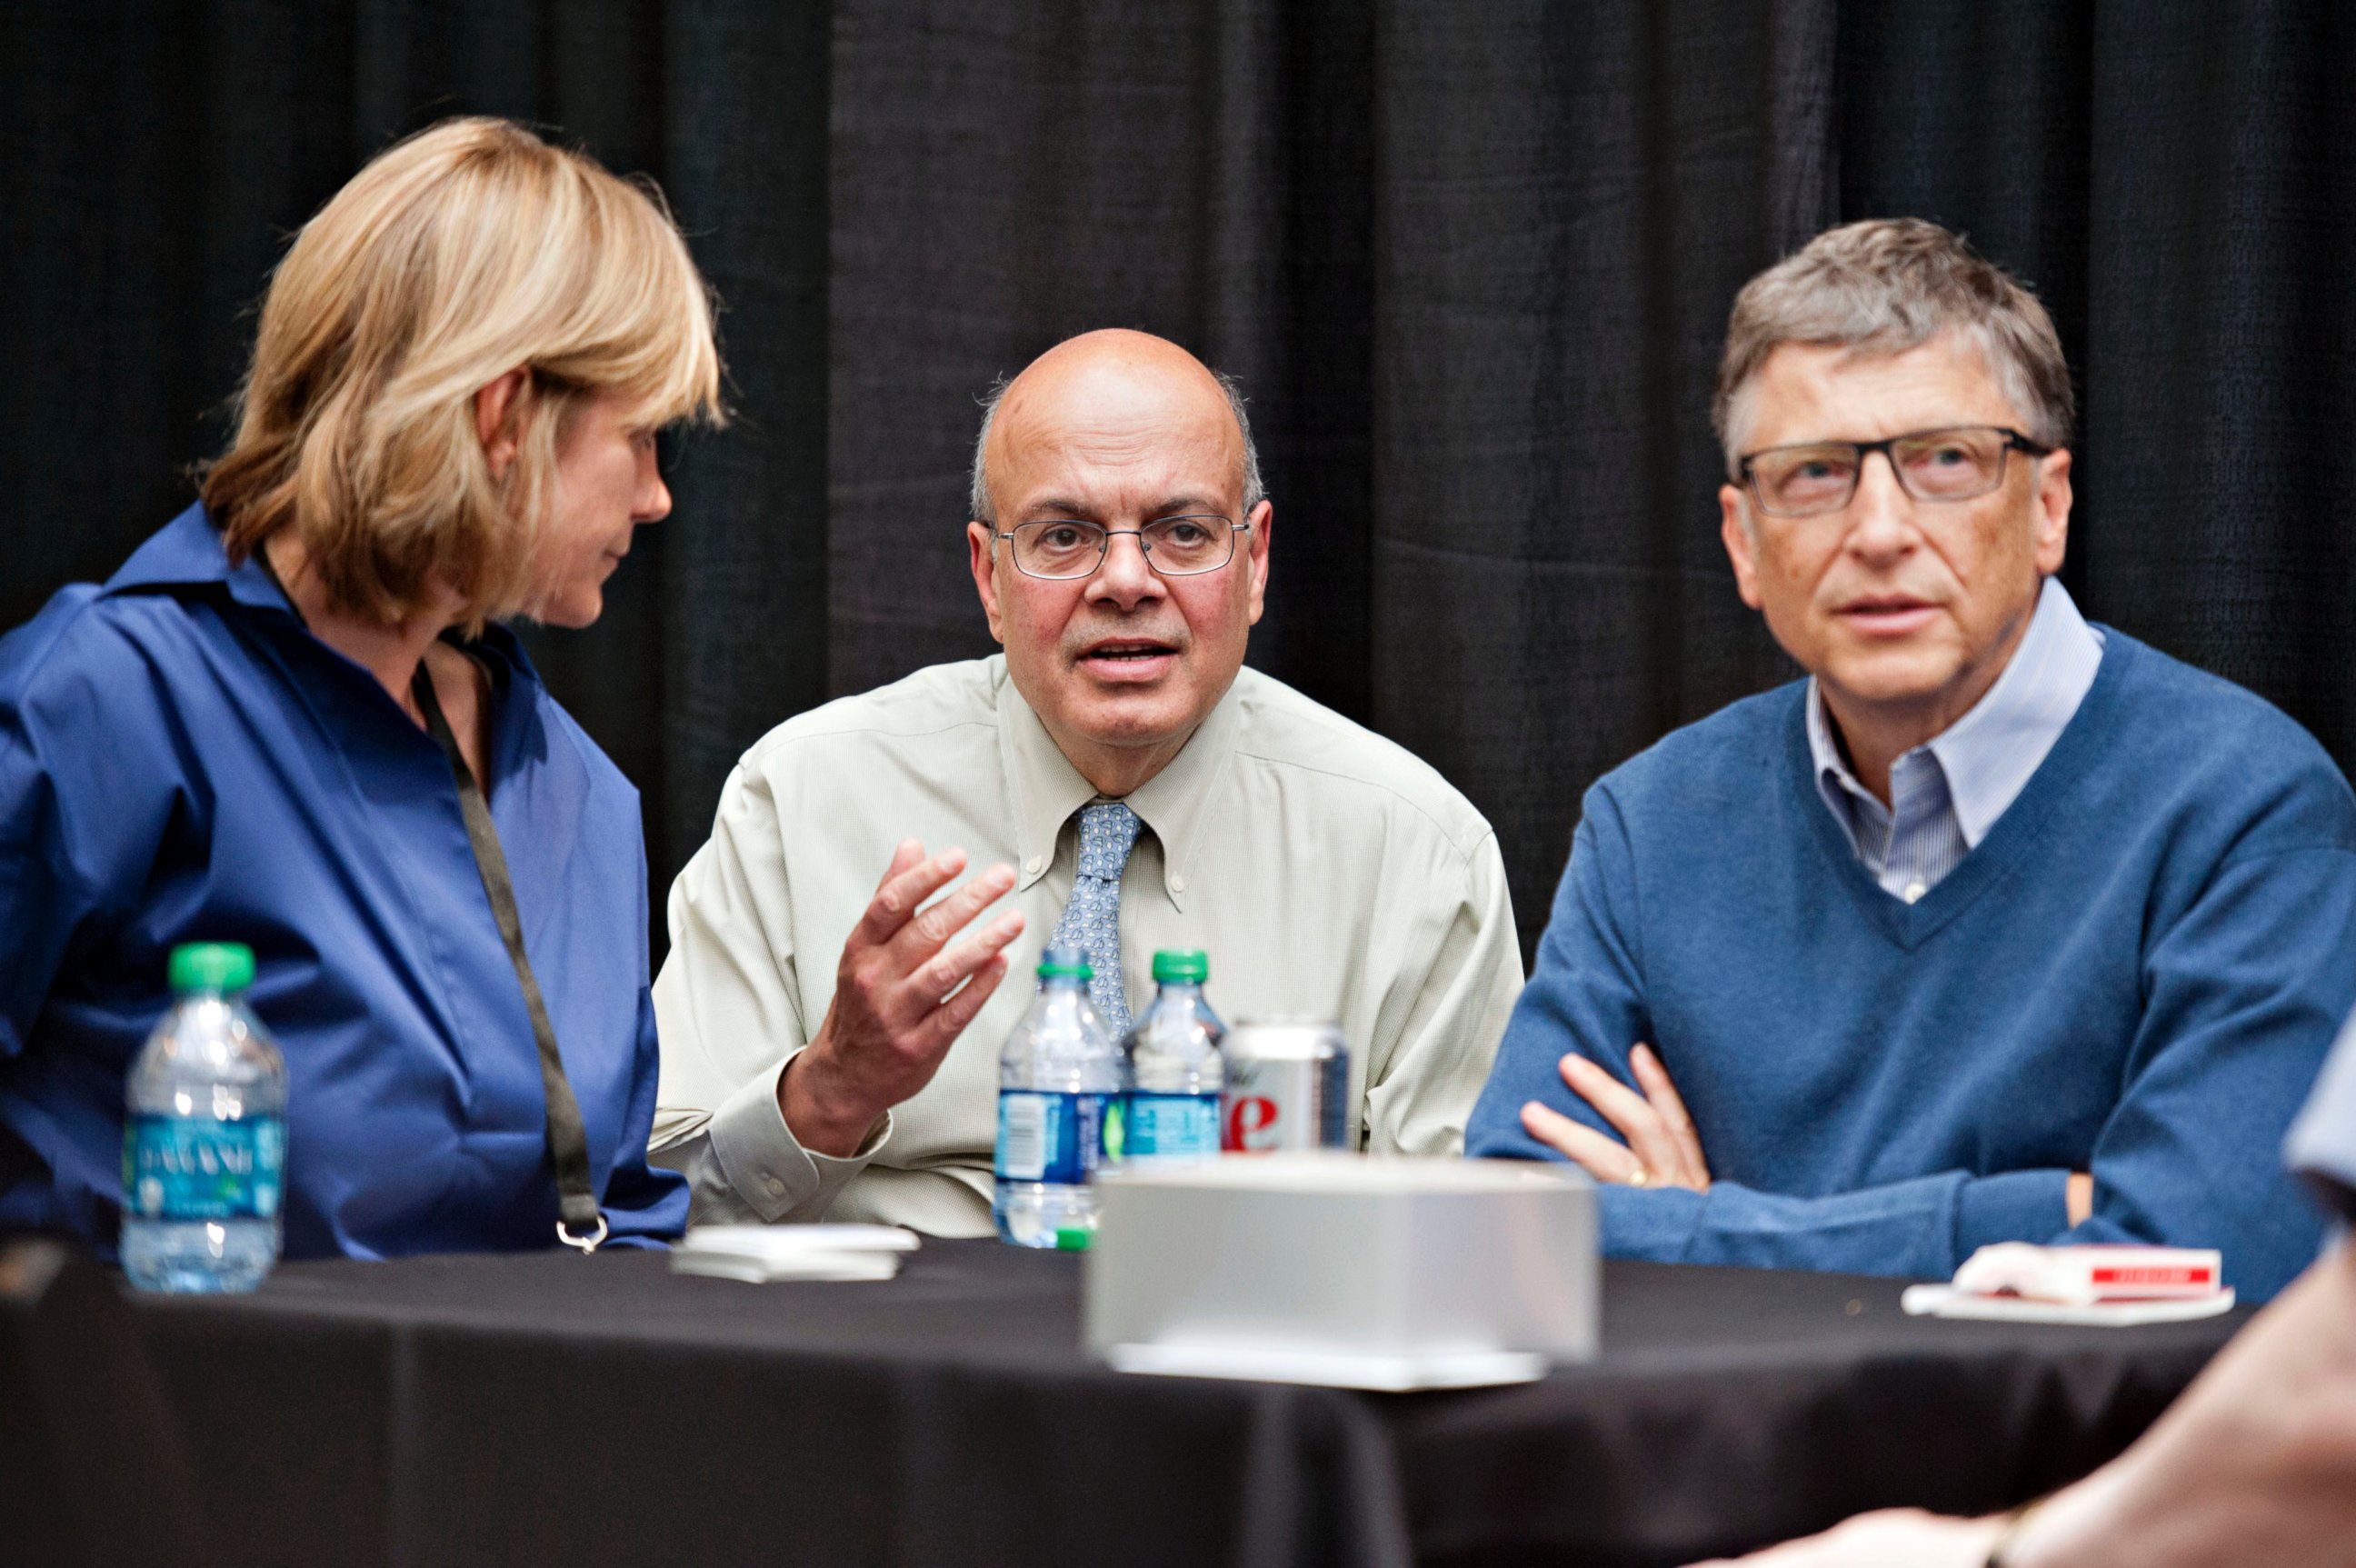 PHOTO: Ajit Jain, head of the Berkshire Hathaway reinsurance business, center, sits next to Bill Gates, chairman and founder of Microsoft Corp. at the Berkshire Hathaway shareholders meeting in Omaha, Nebraska,  May 4, 2014. 